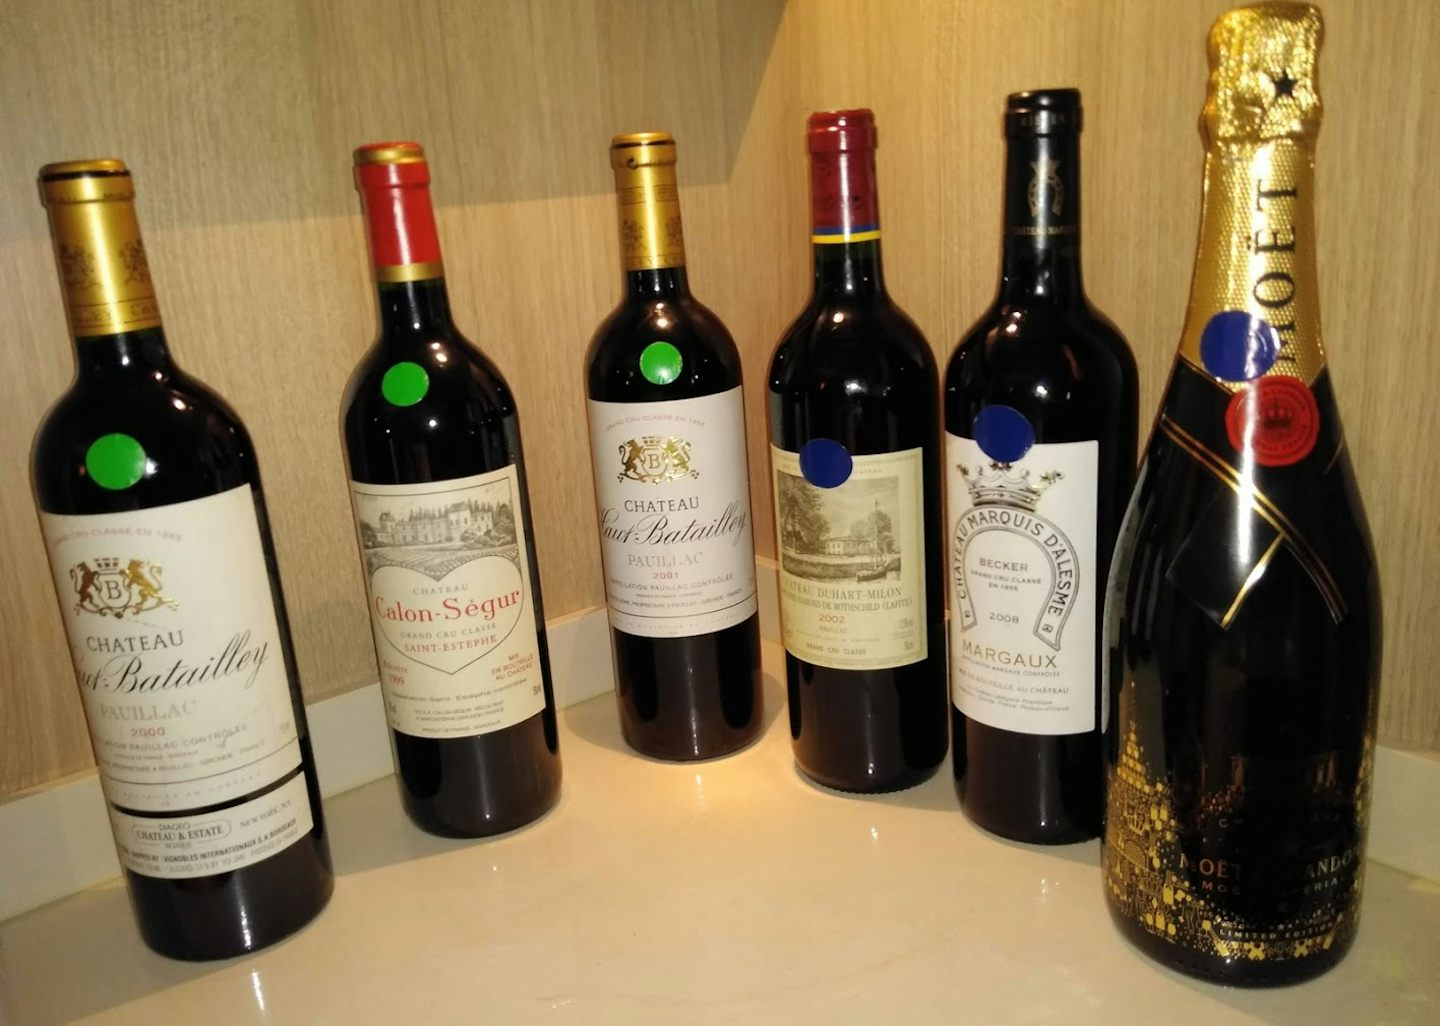 Some of the wine brought on board